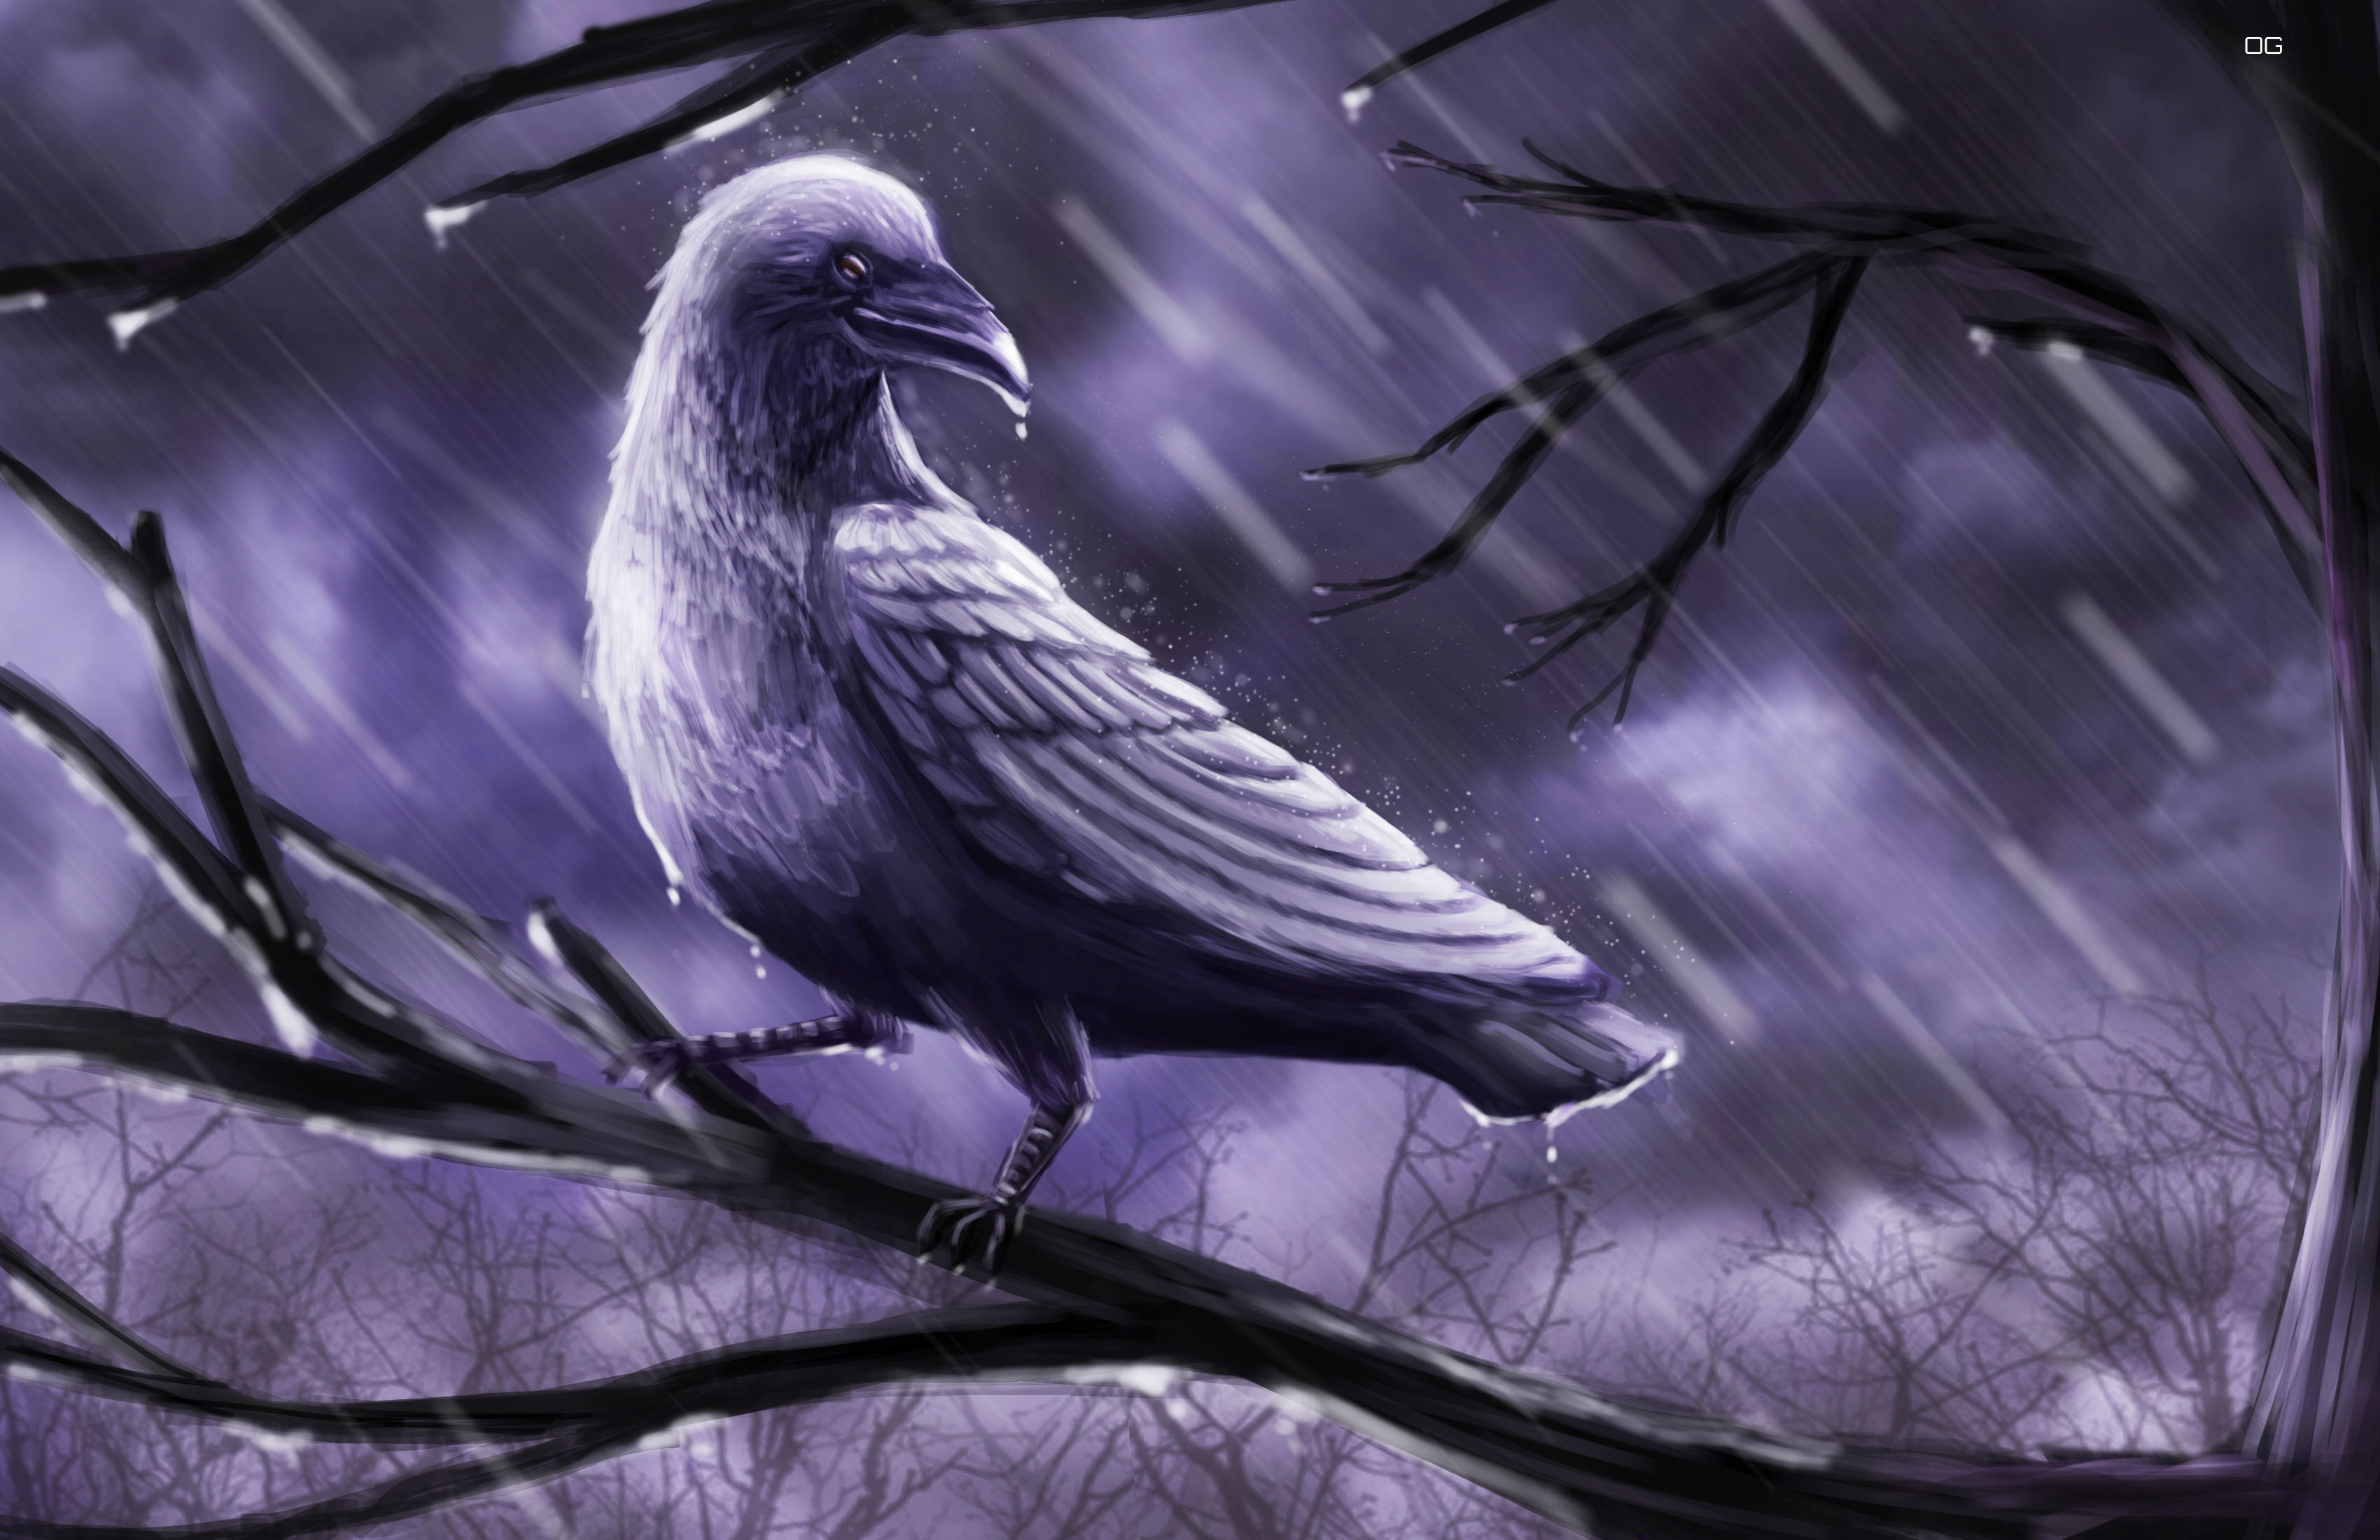 Crow book Illustration
  
  <p>CONCEPT: Illustrate a painting of a crow for a story. The crow must be in a stressful environment, but yet show confidence and bravery.</p>
  <p>HOW DESIGN SOLVES PROBLEMS,: I illustrated the storm to suggest a dark gloomy mood and bright lights that relates to lightning and to help reveal the crow better.</p>
  <p>PROCESS: research/ sketch and refine</p>
  <p>TOOLS USED: Photoshop</p>
  <p>CHALLENGES:  Understanding the anatomy of a crow, and what differentiates them from other birds such as ravens. </p>
  